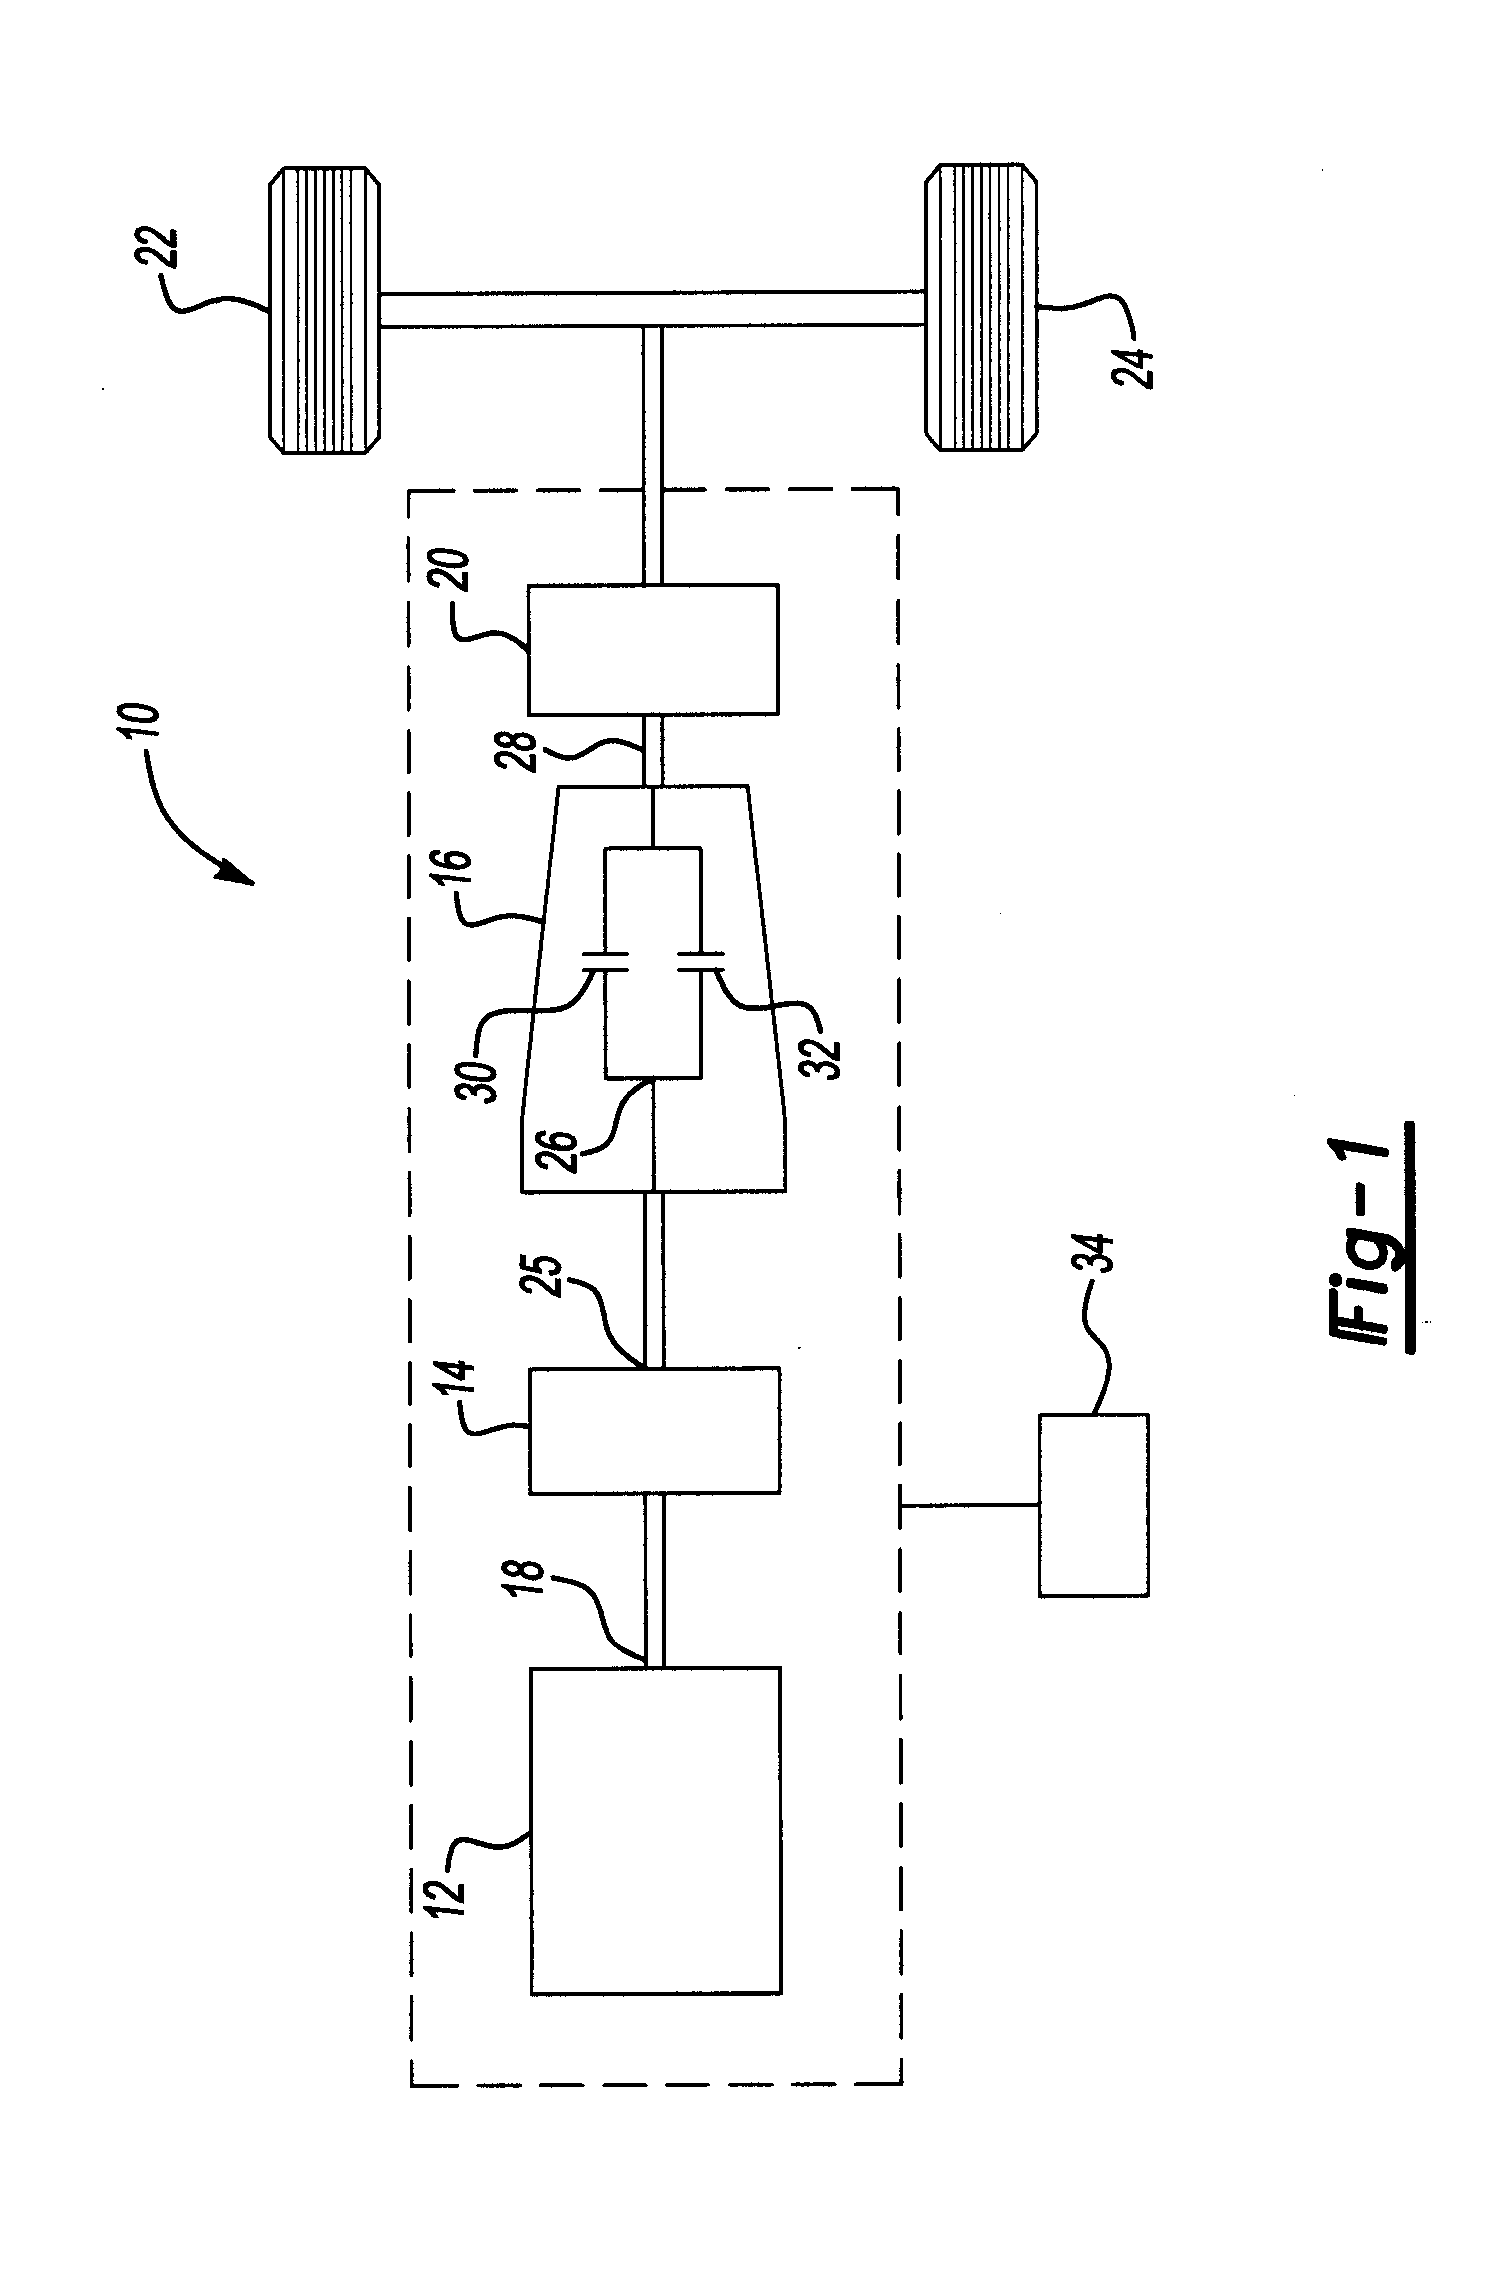 Method and system for using mechanical power to operate a hybrid electric vehicle